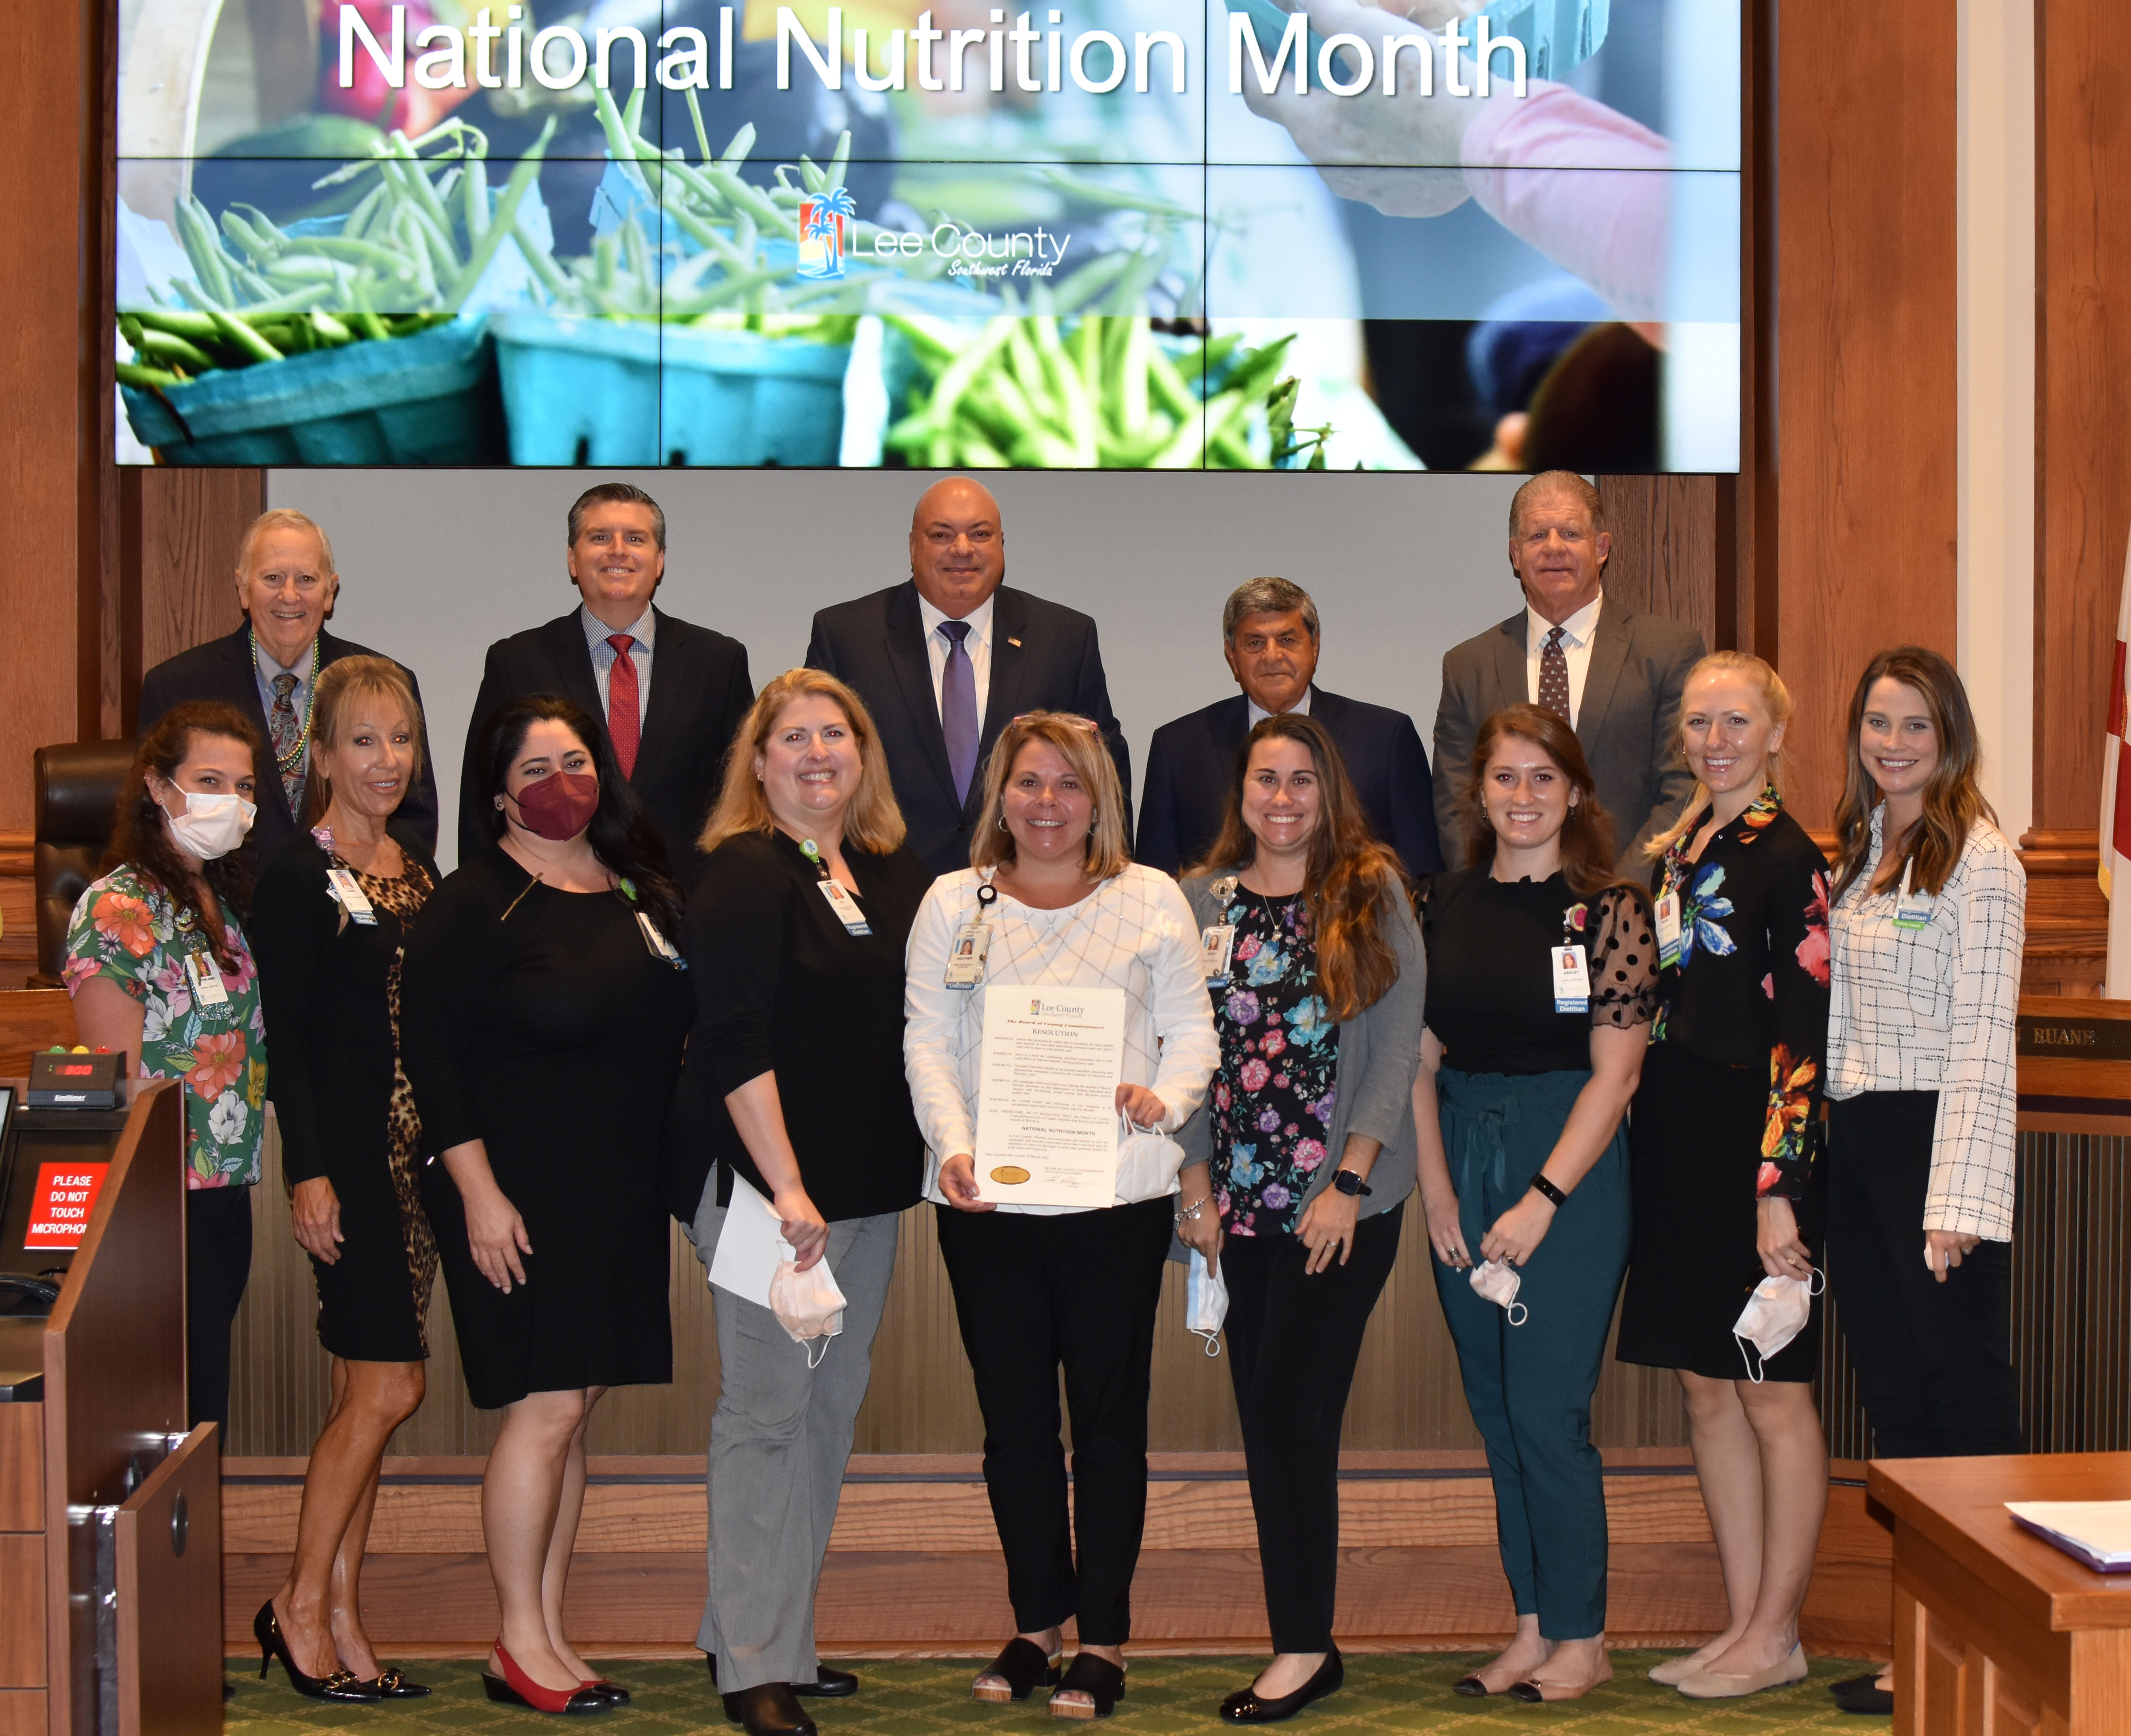 03-01-22 National Nutrition Month